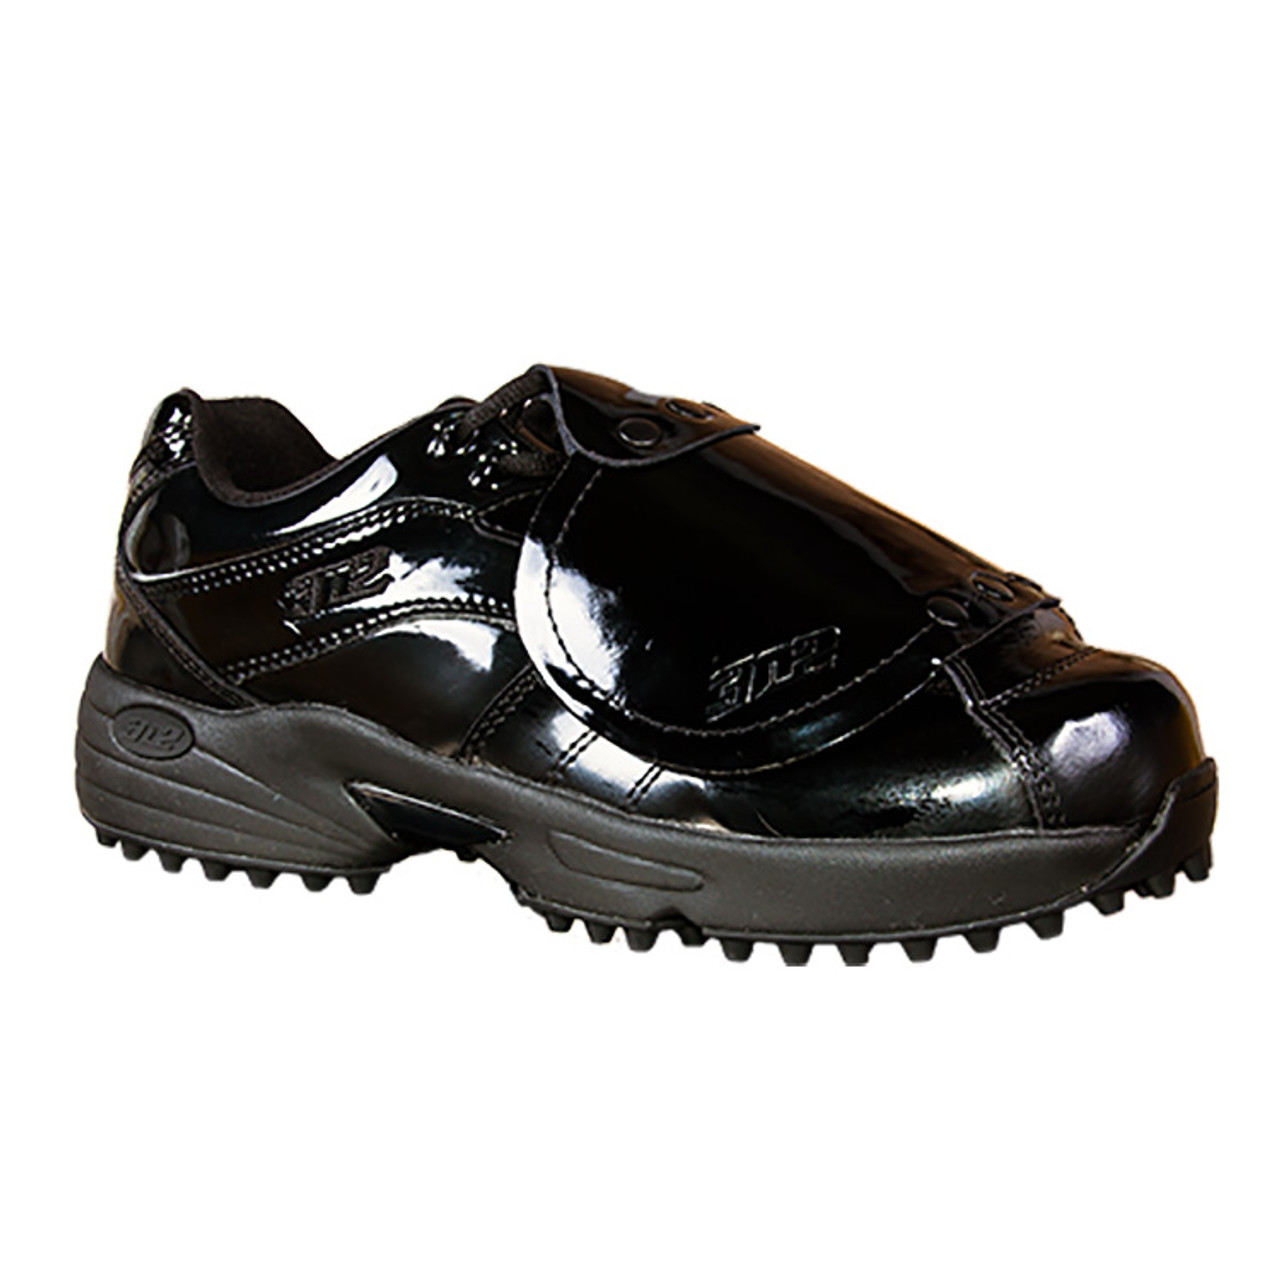  3N2 Reaction Referee Patent Leather EE Baseball Equipment,  Black Patent Leather, Size 6 : Clothing, Shoes & Jewelry